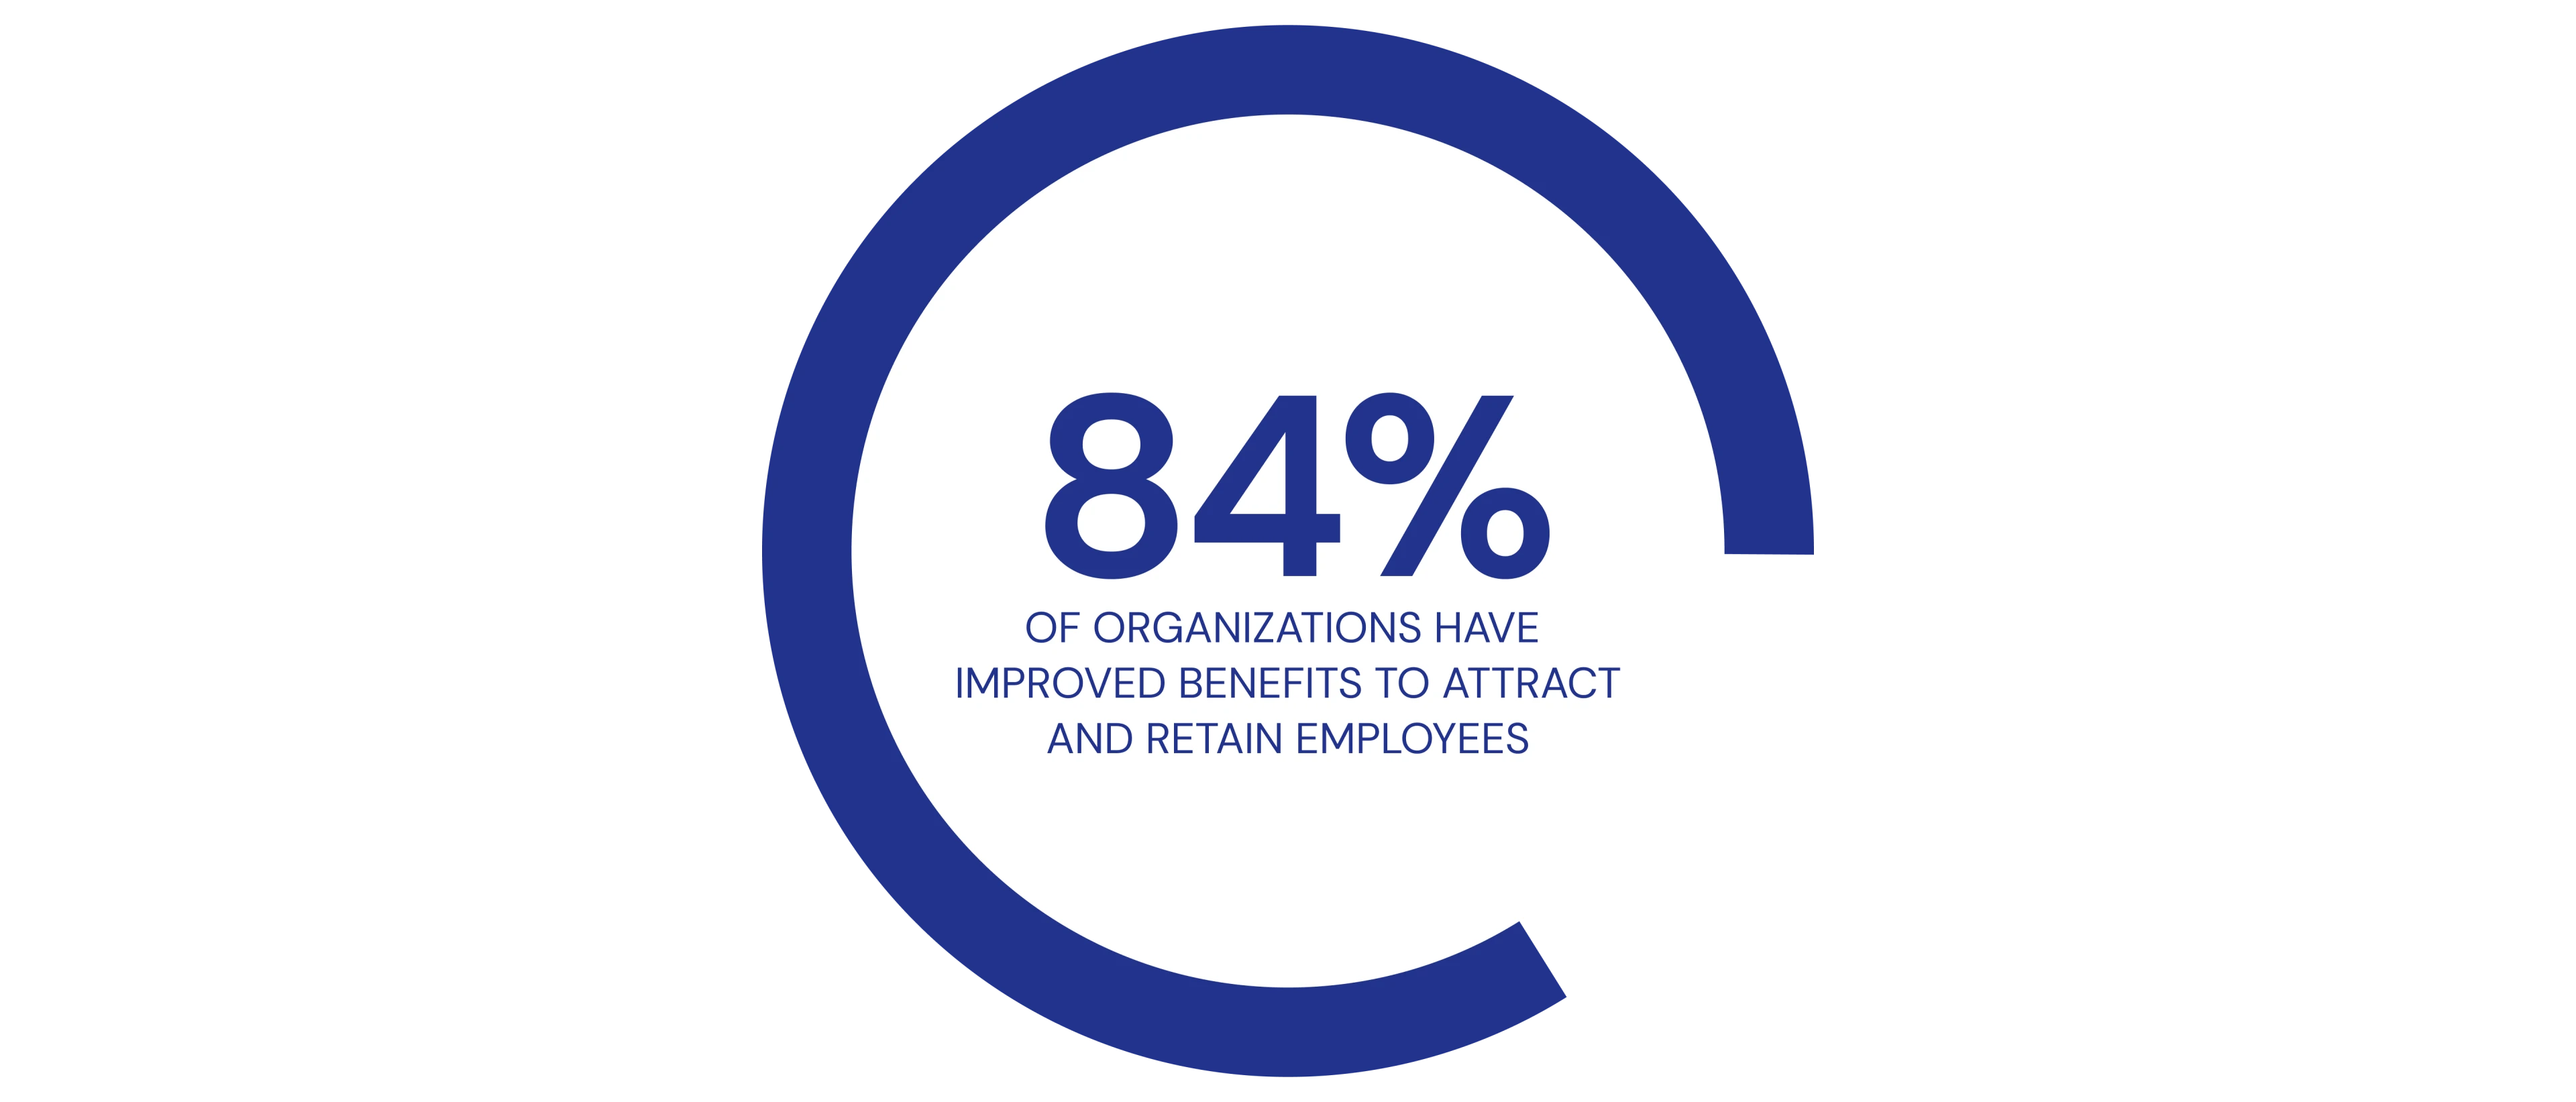 blog-84-orgs-improved-benefits-to-attract-retain-employees